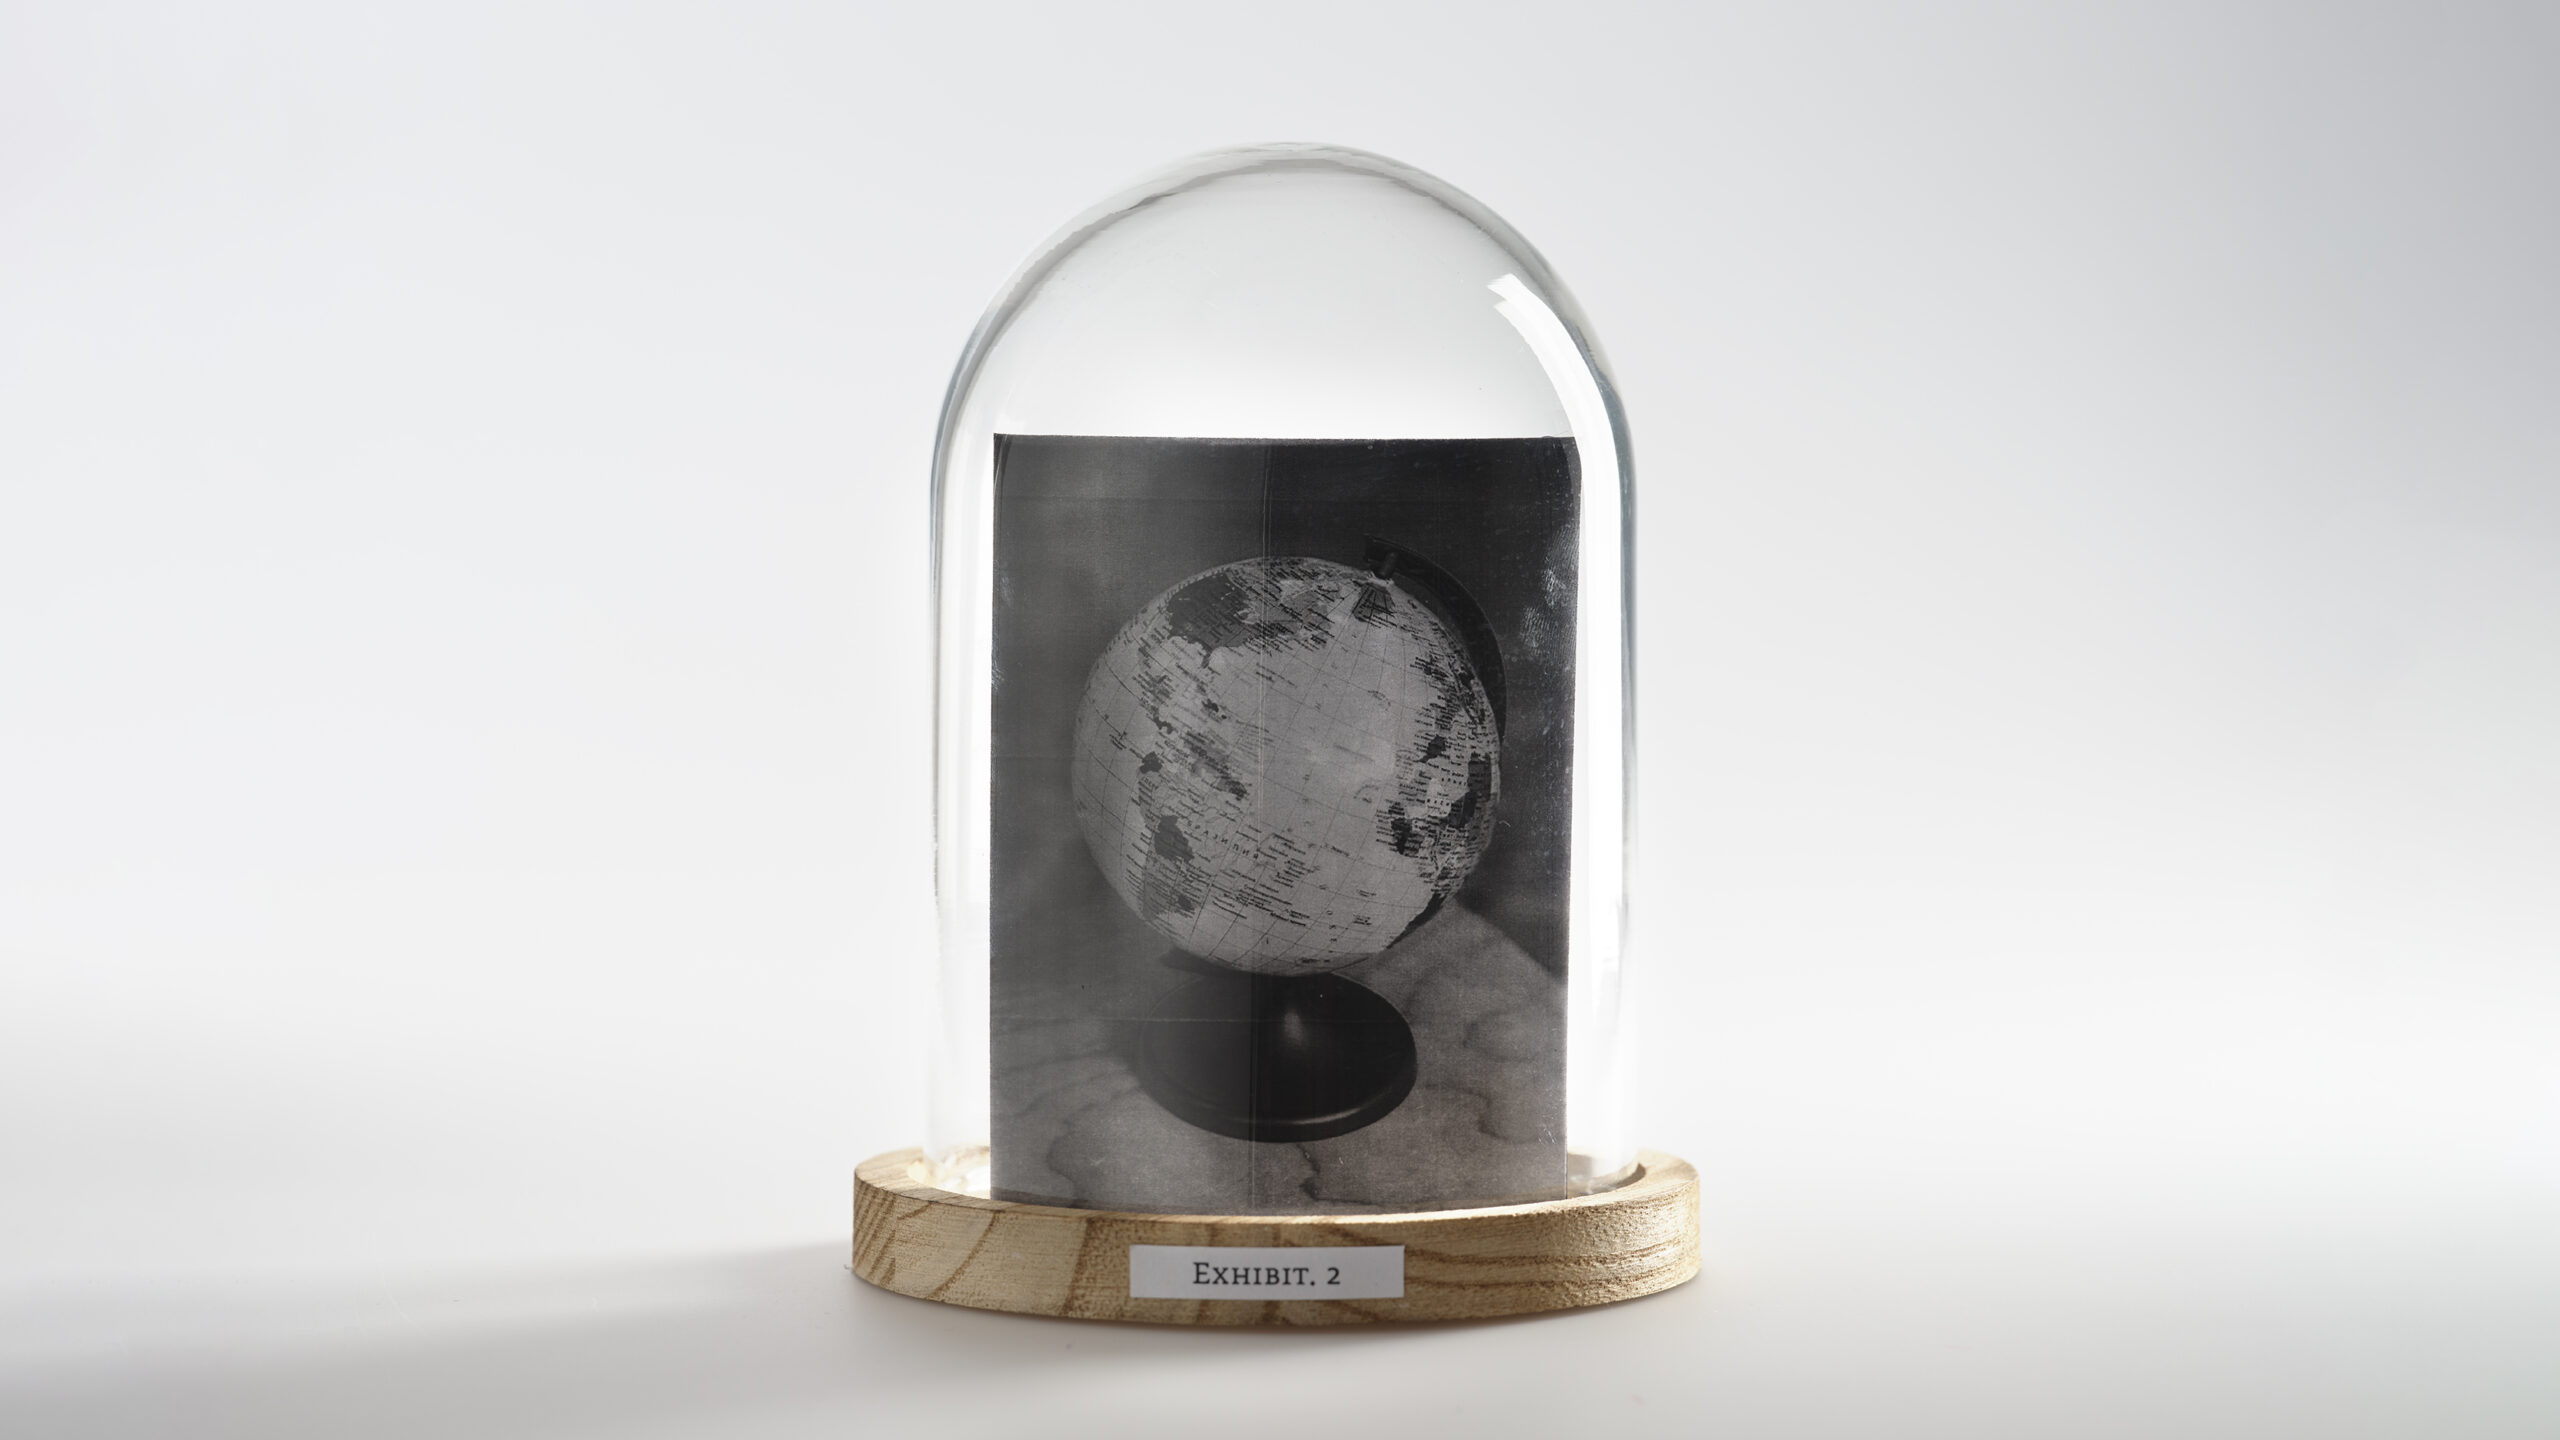 A bell jar with an image of a globe inside.